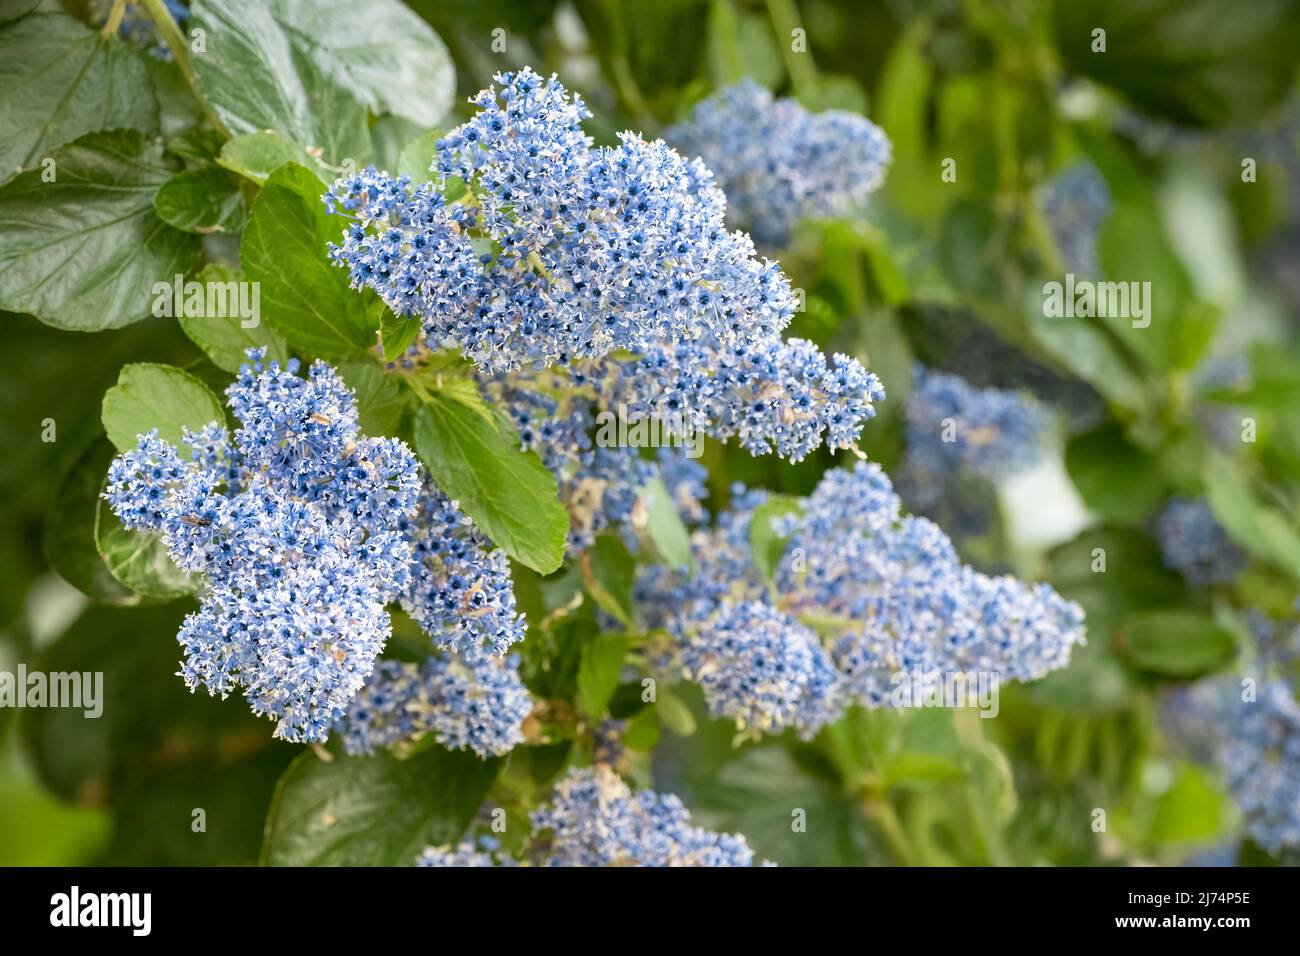 Close up of a cluster of the beautiful blue flowers of an evergreen Ceanothus shrub (Ceanothus Concha). Stock Photo